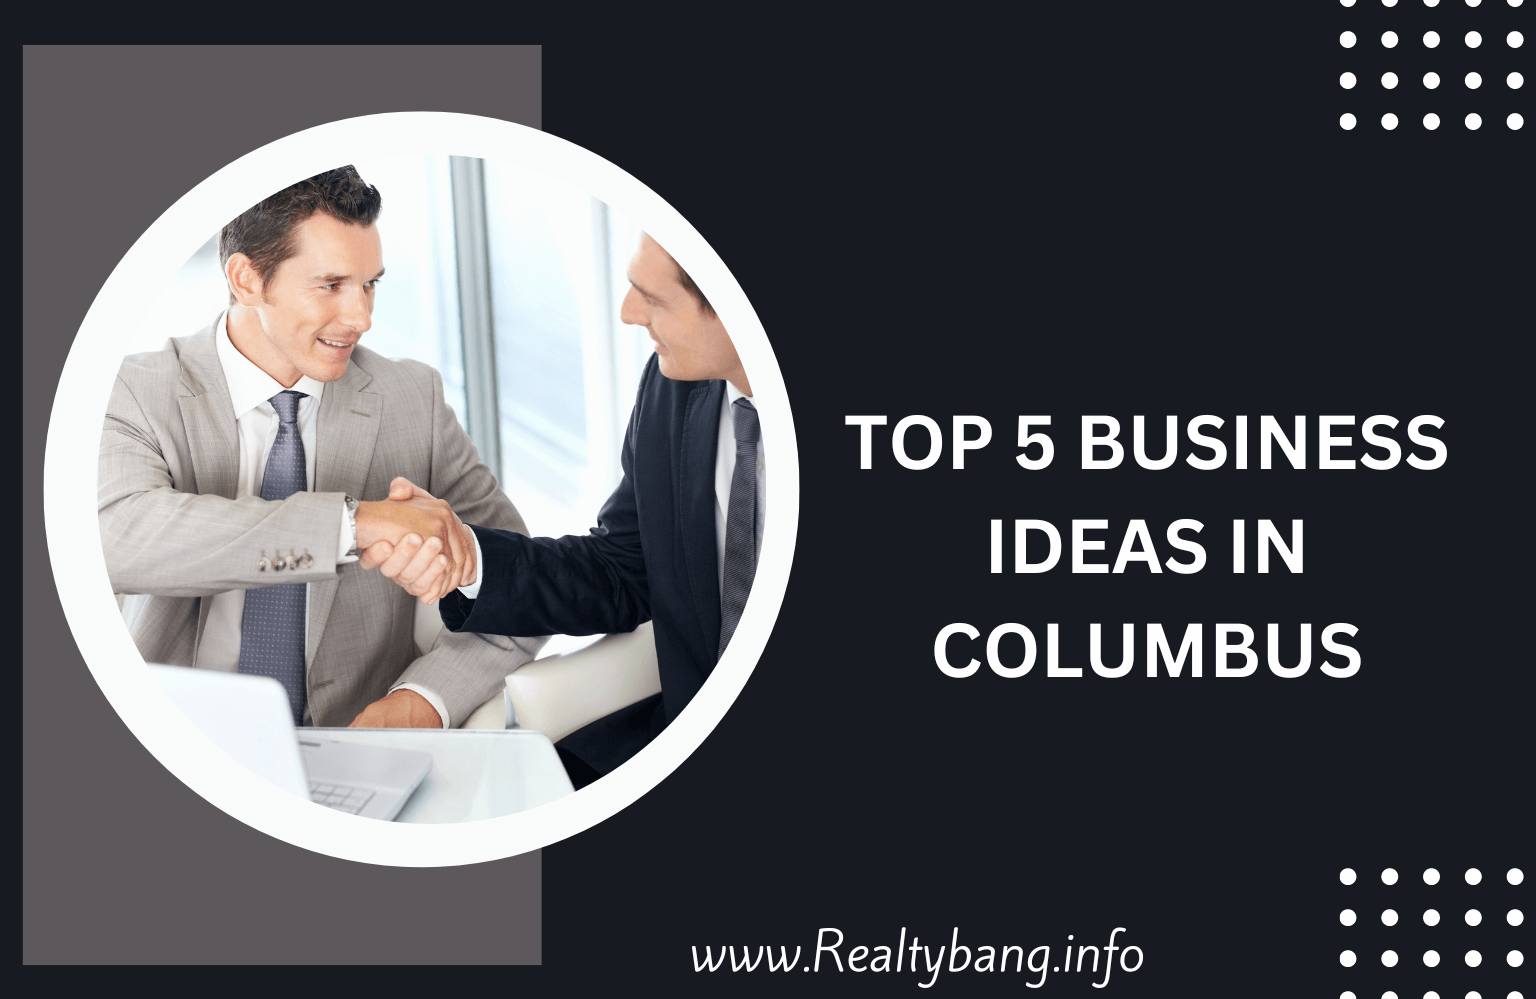 TOP 5 BUSINESS IDEAS IN COLUMBUS